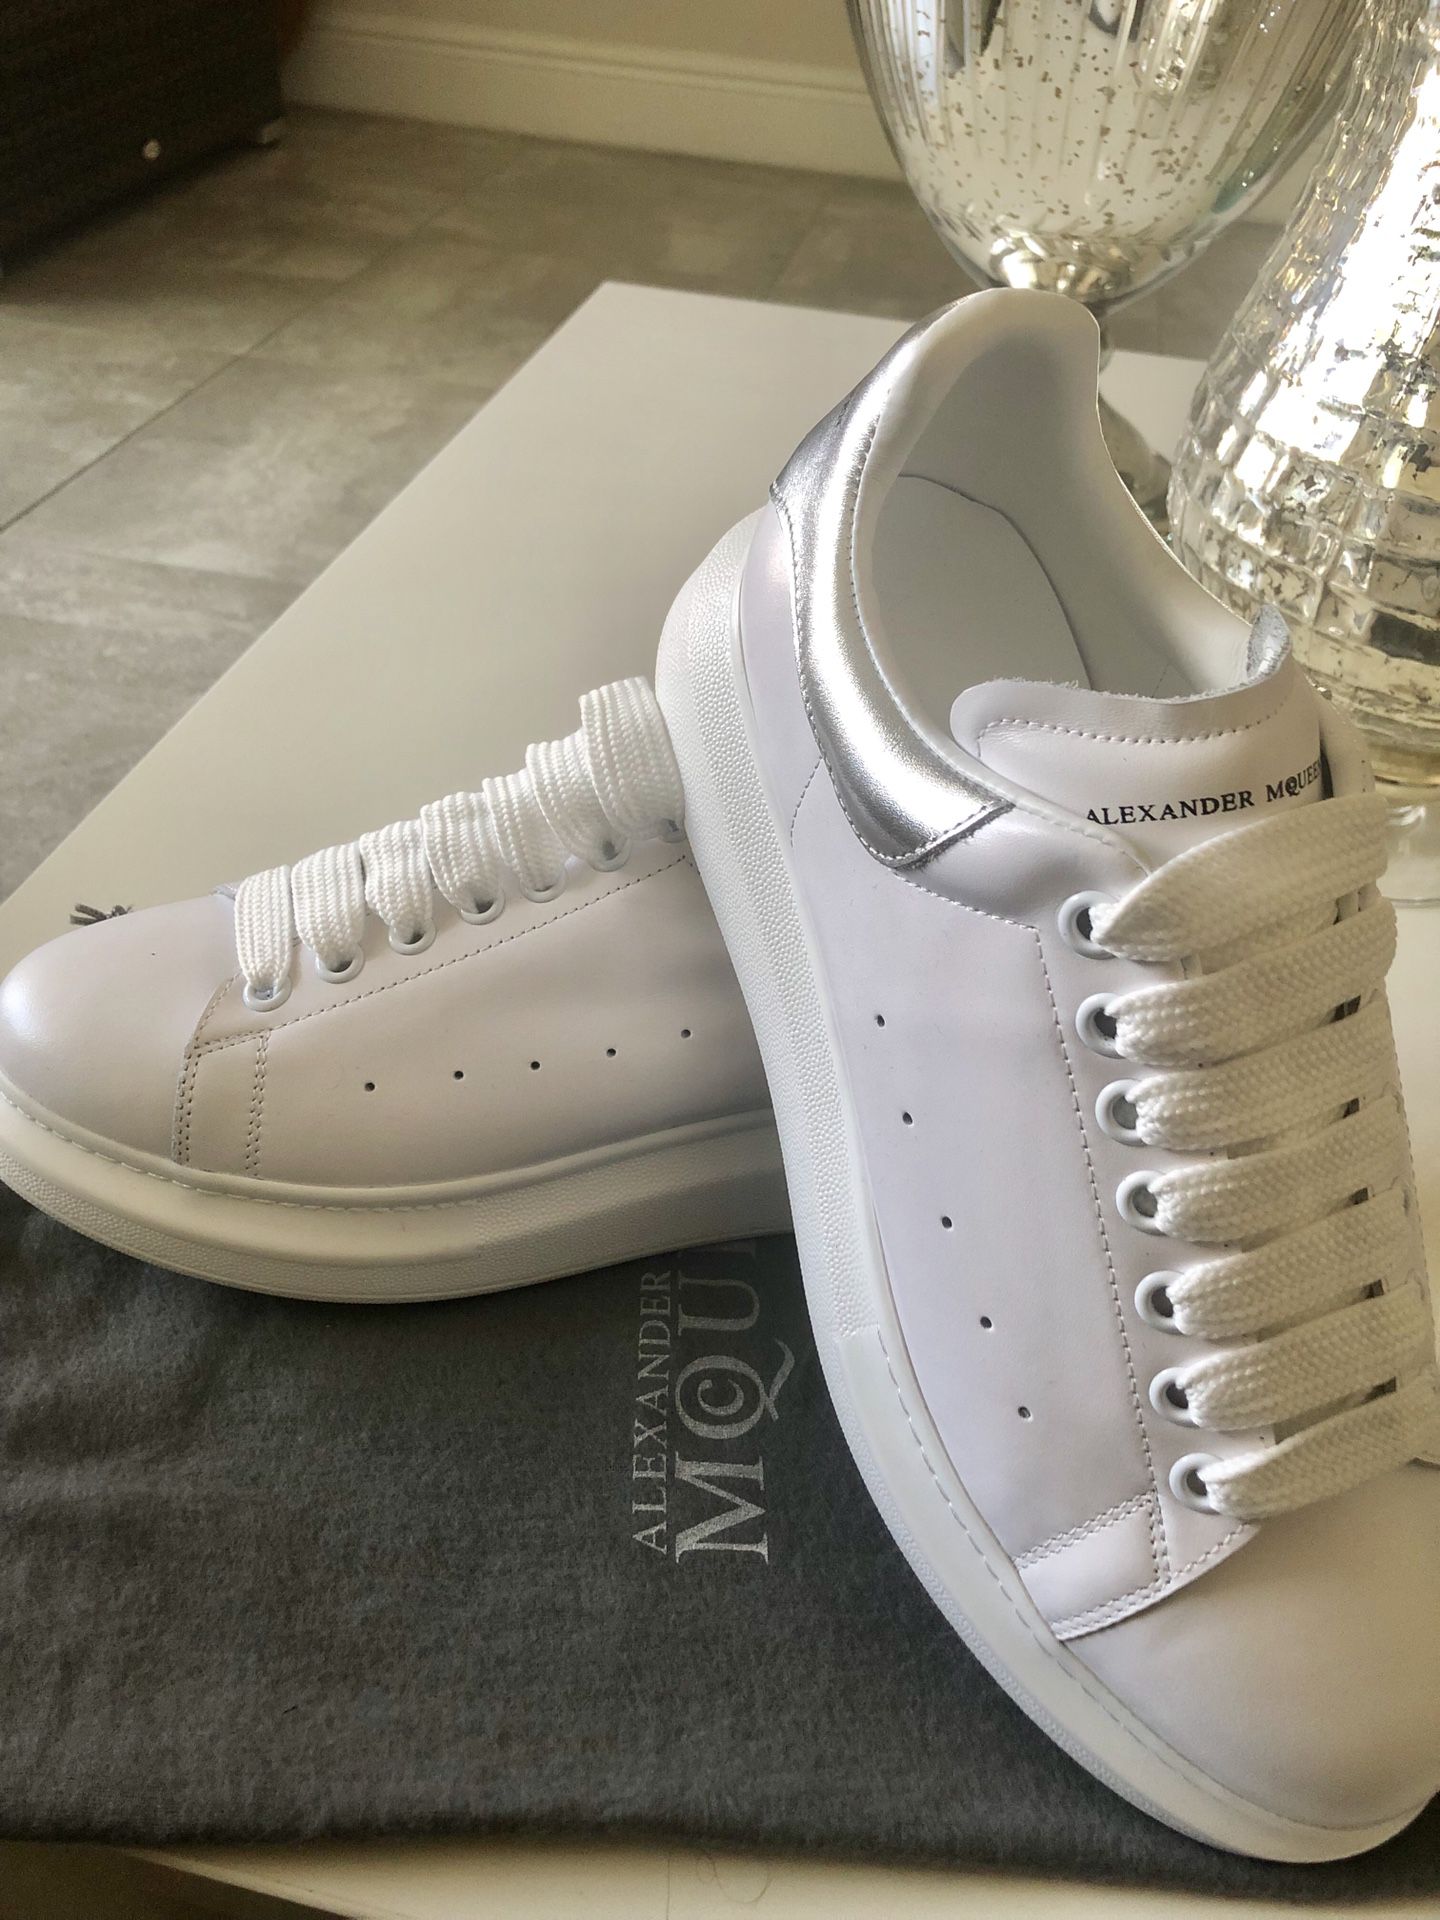 Battleship Sheet Clean the room Alexander McQueen Oversized Sneakers Size • 43 for Sale in Miami, FL -  OfferUp